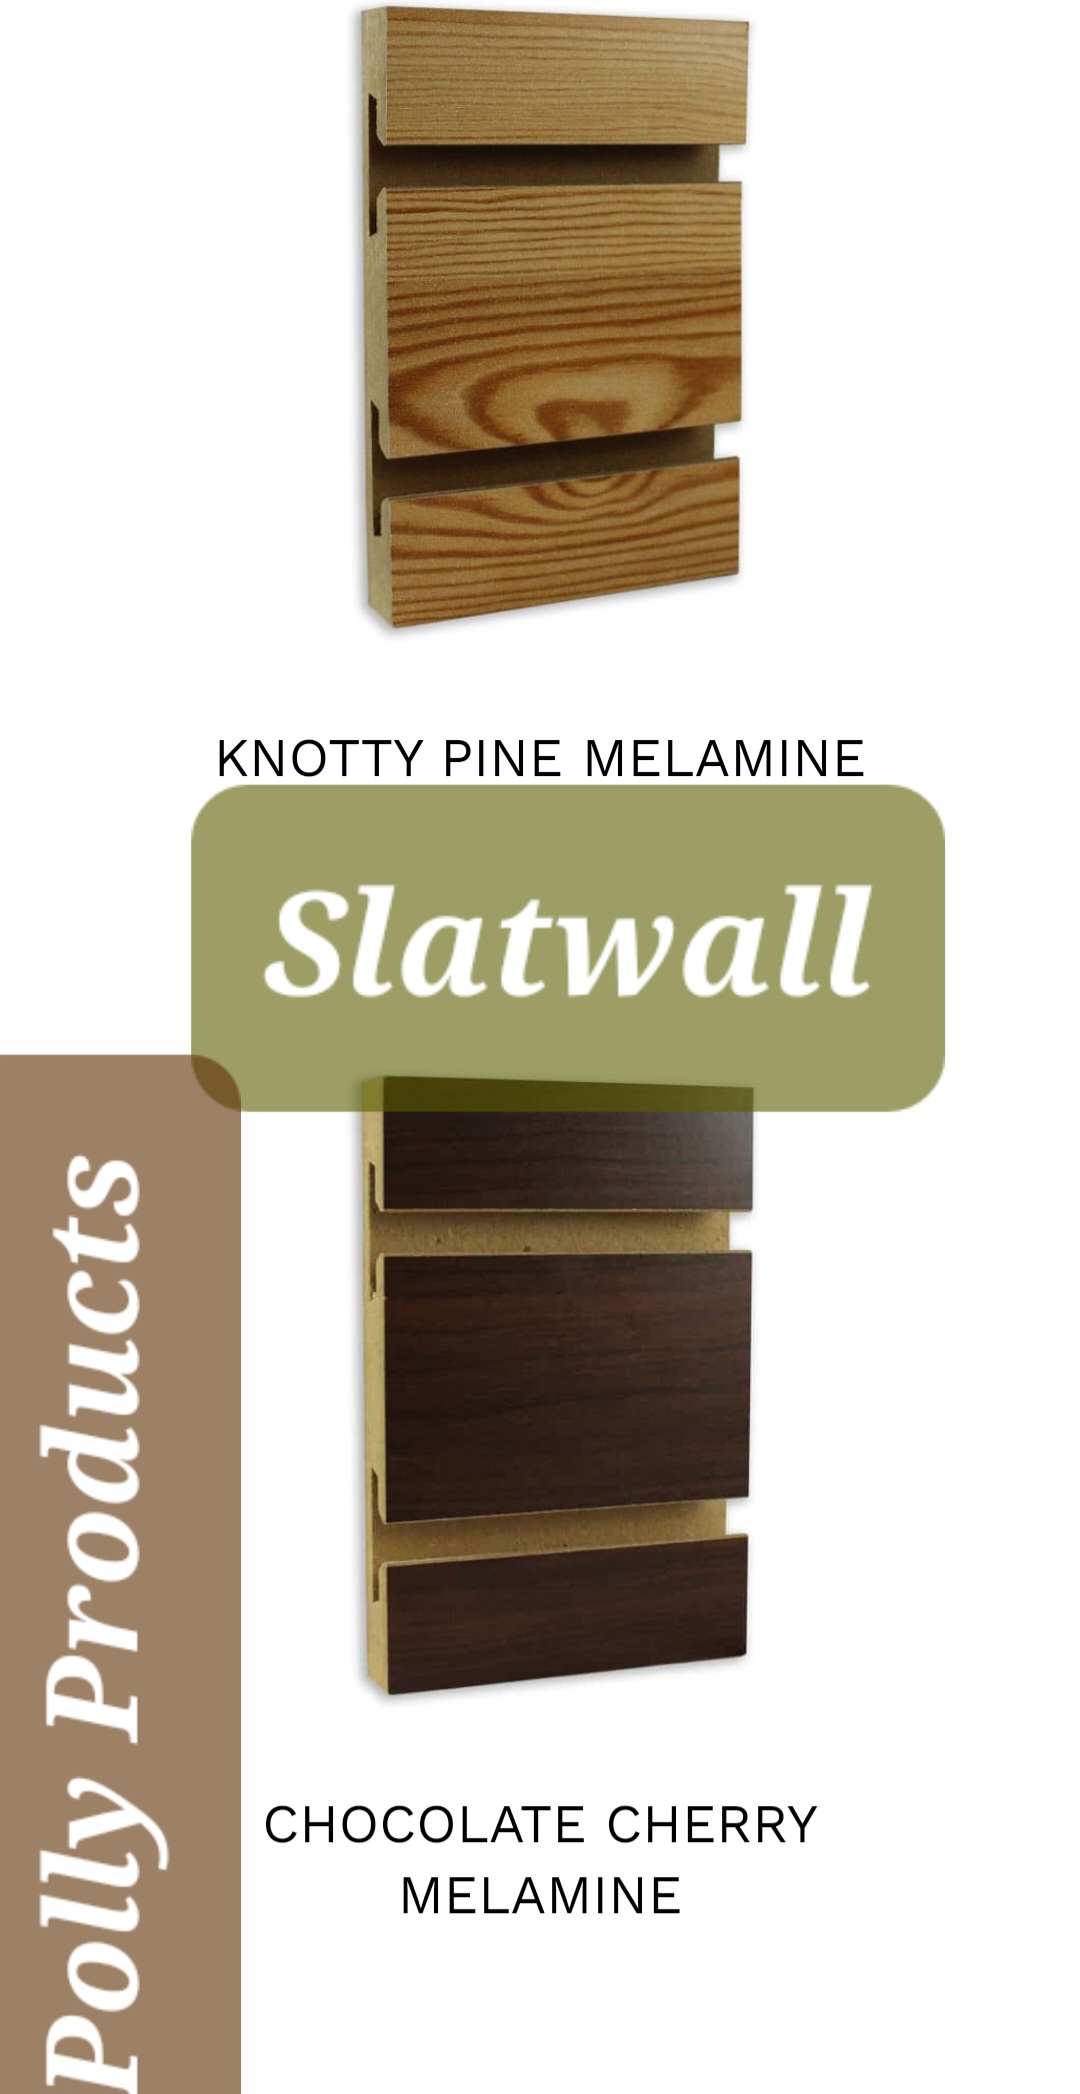 Polly Products Slatwall SYSTEMS. MADE IN THE USA QUALITY 